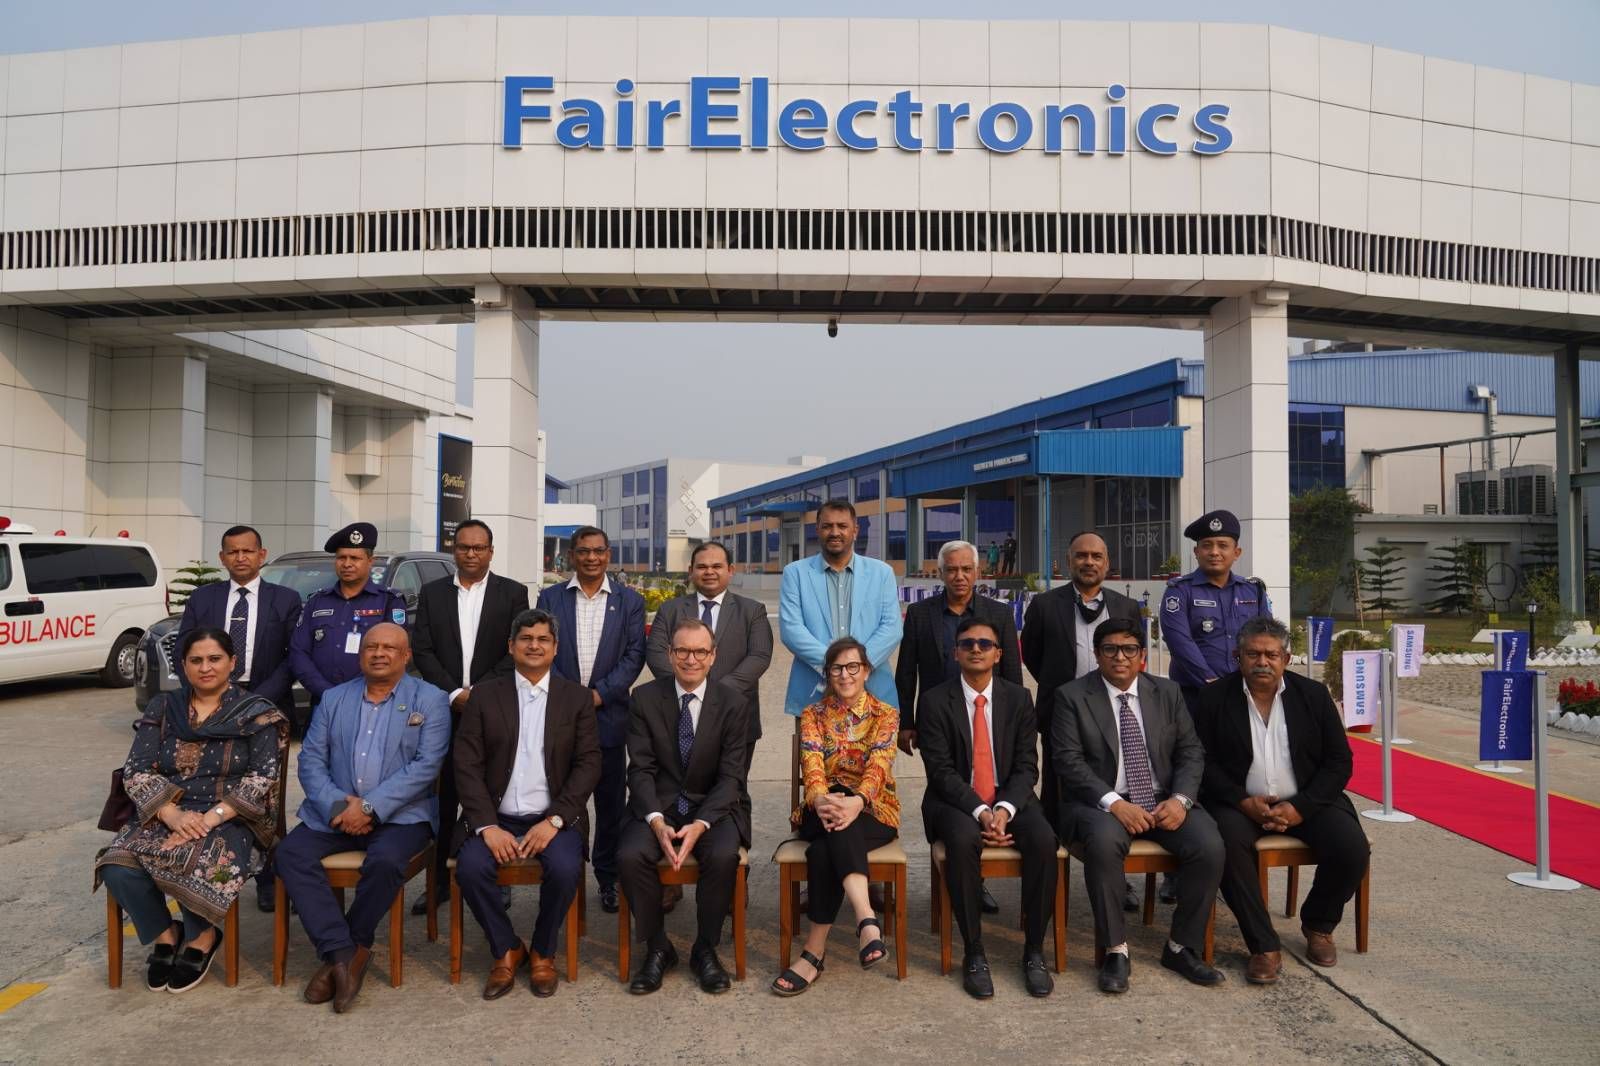 British High Commissioner's visit to Fair Electronics Factory